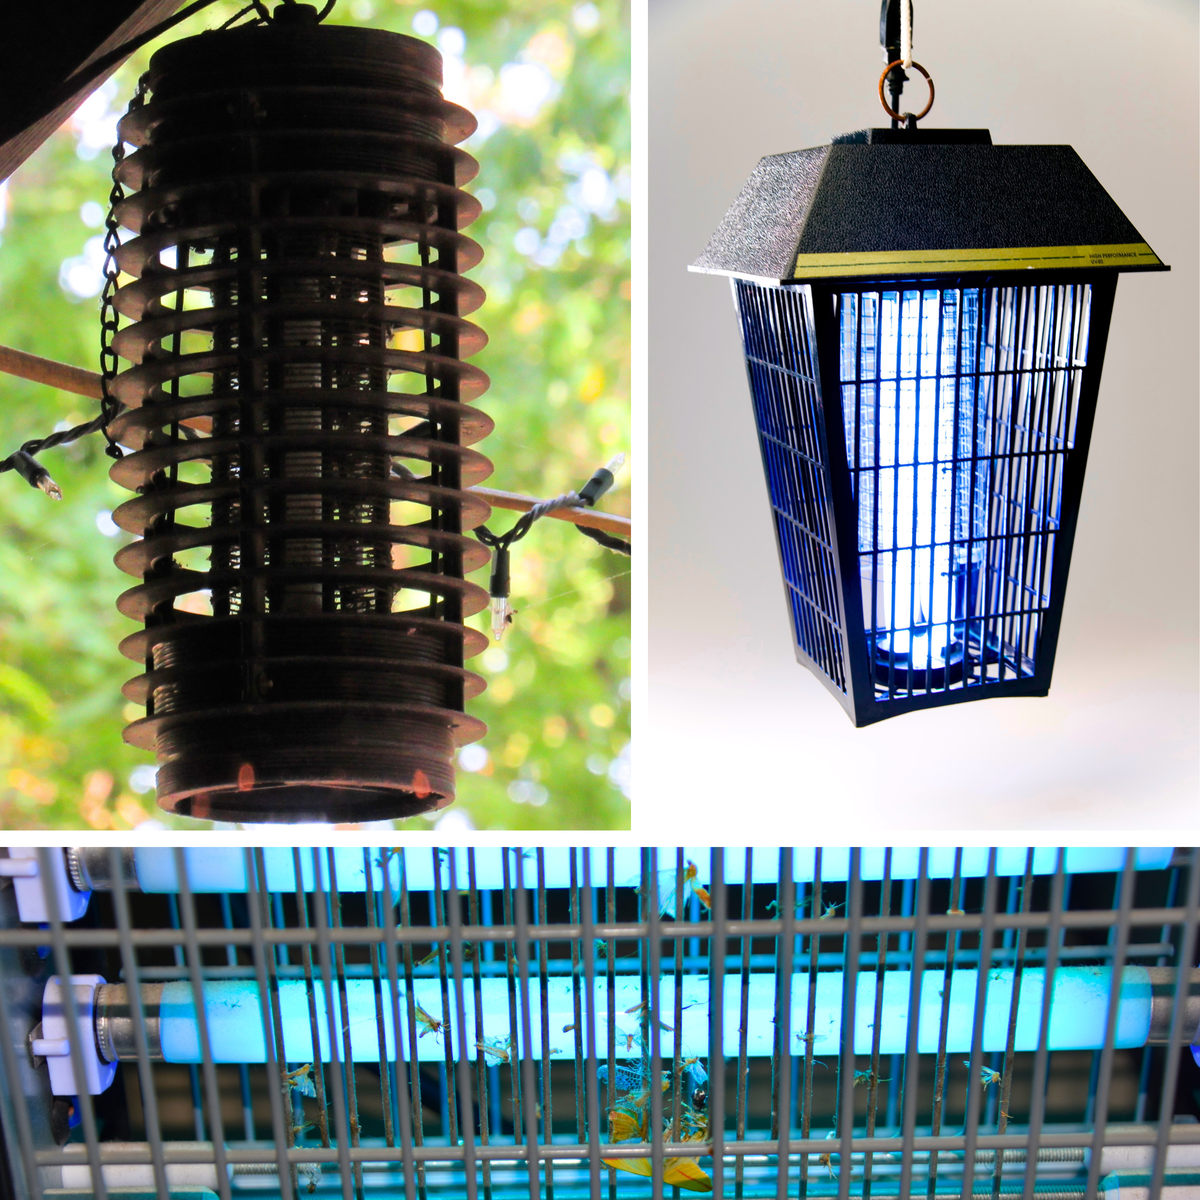 Bug zapper under porch, lit bug zapper, bug zapper with dead insects.